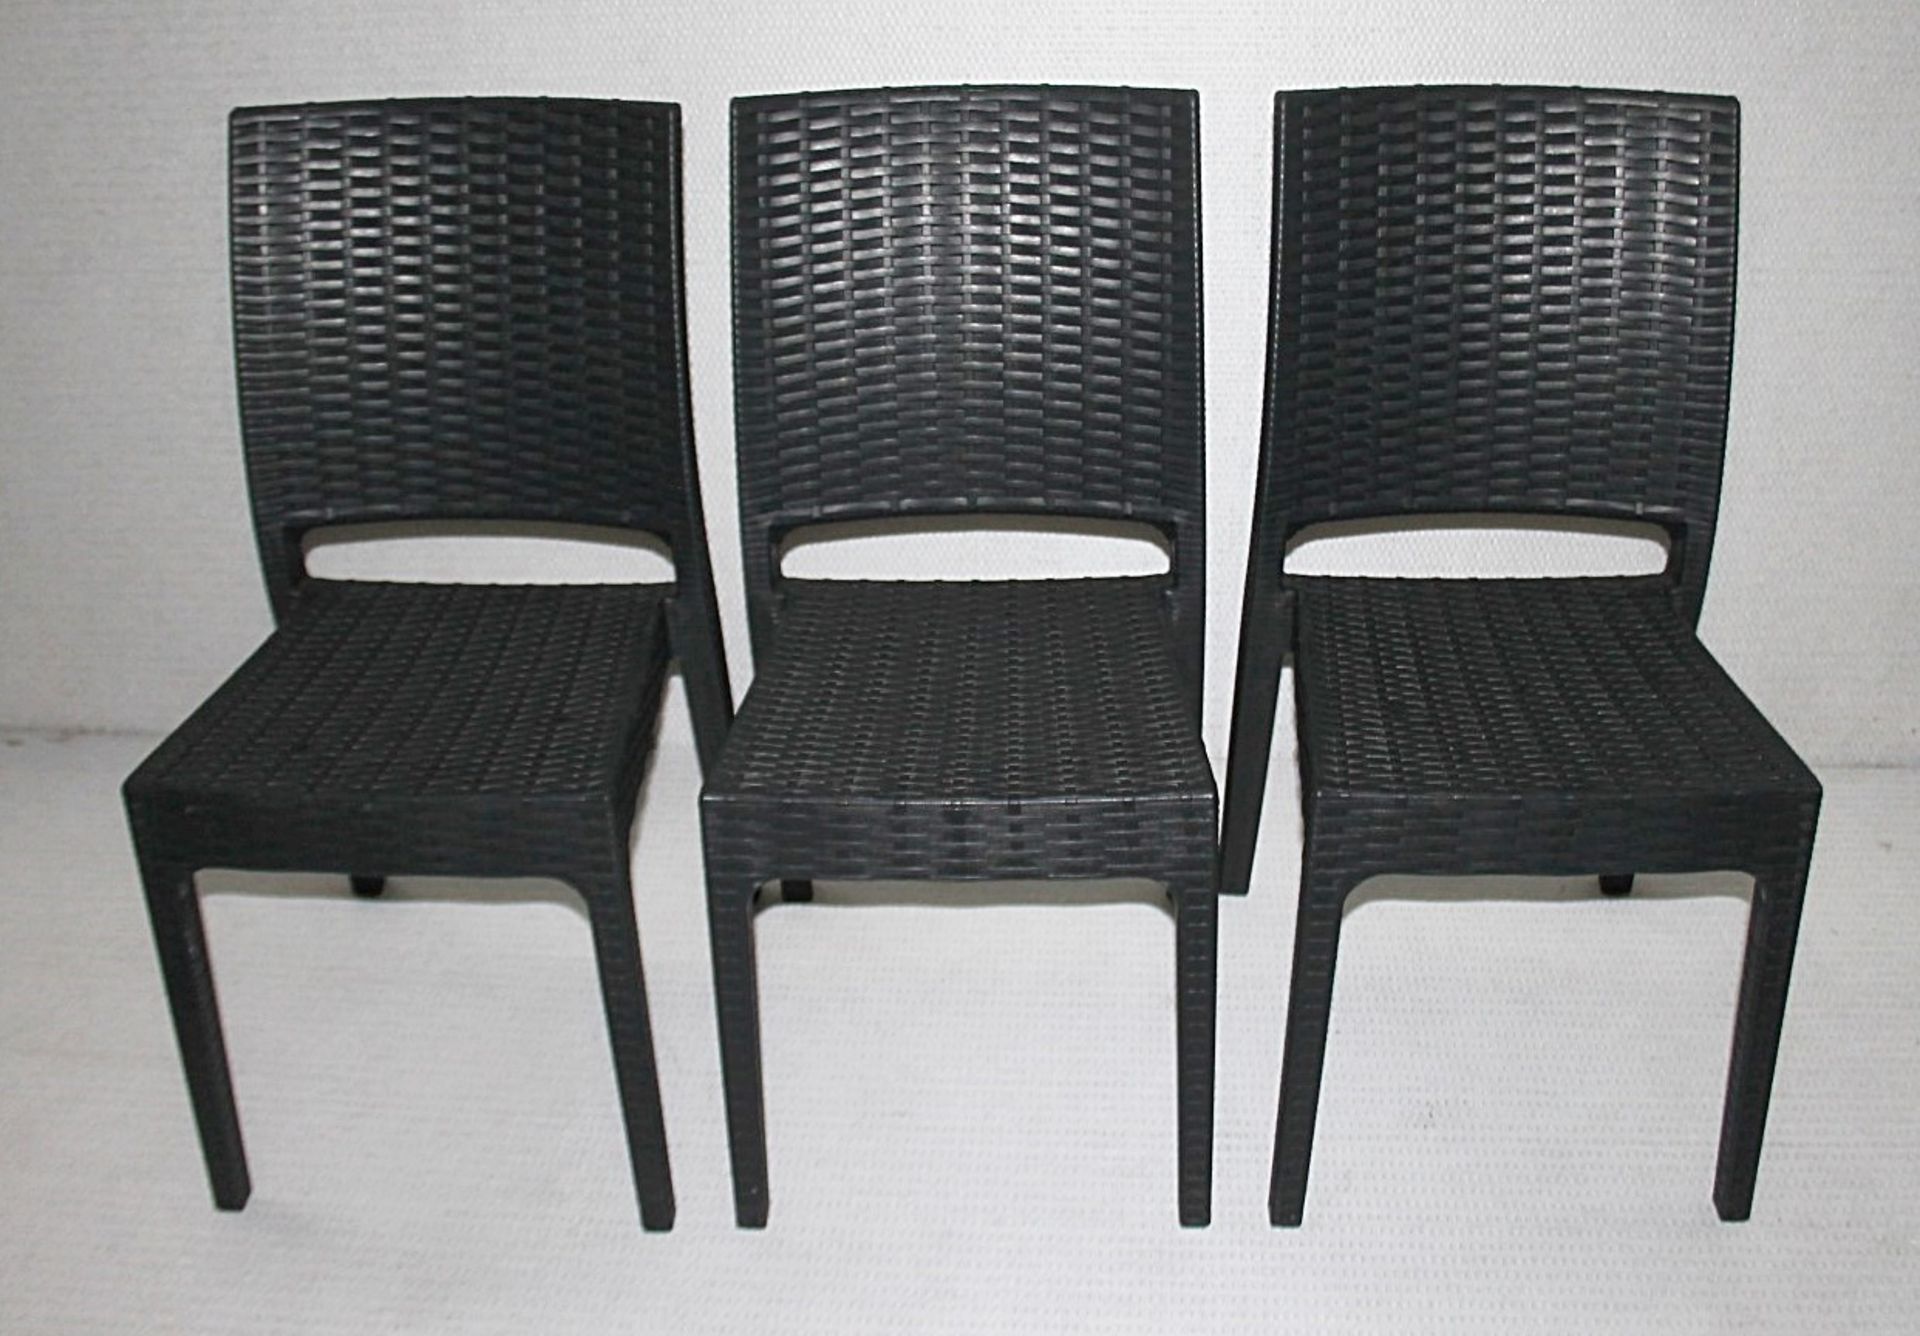 8 x Siesta 'Florida' Rattan Style Garden Chairs In Dark Grey - Suitable For Commercial or Home Use - - Image 6 of 14